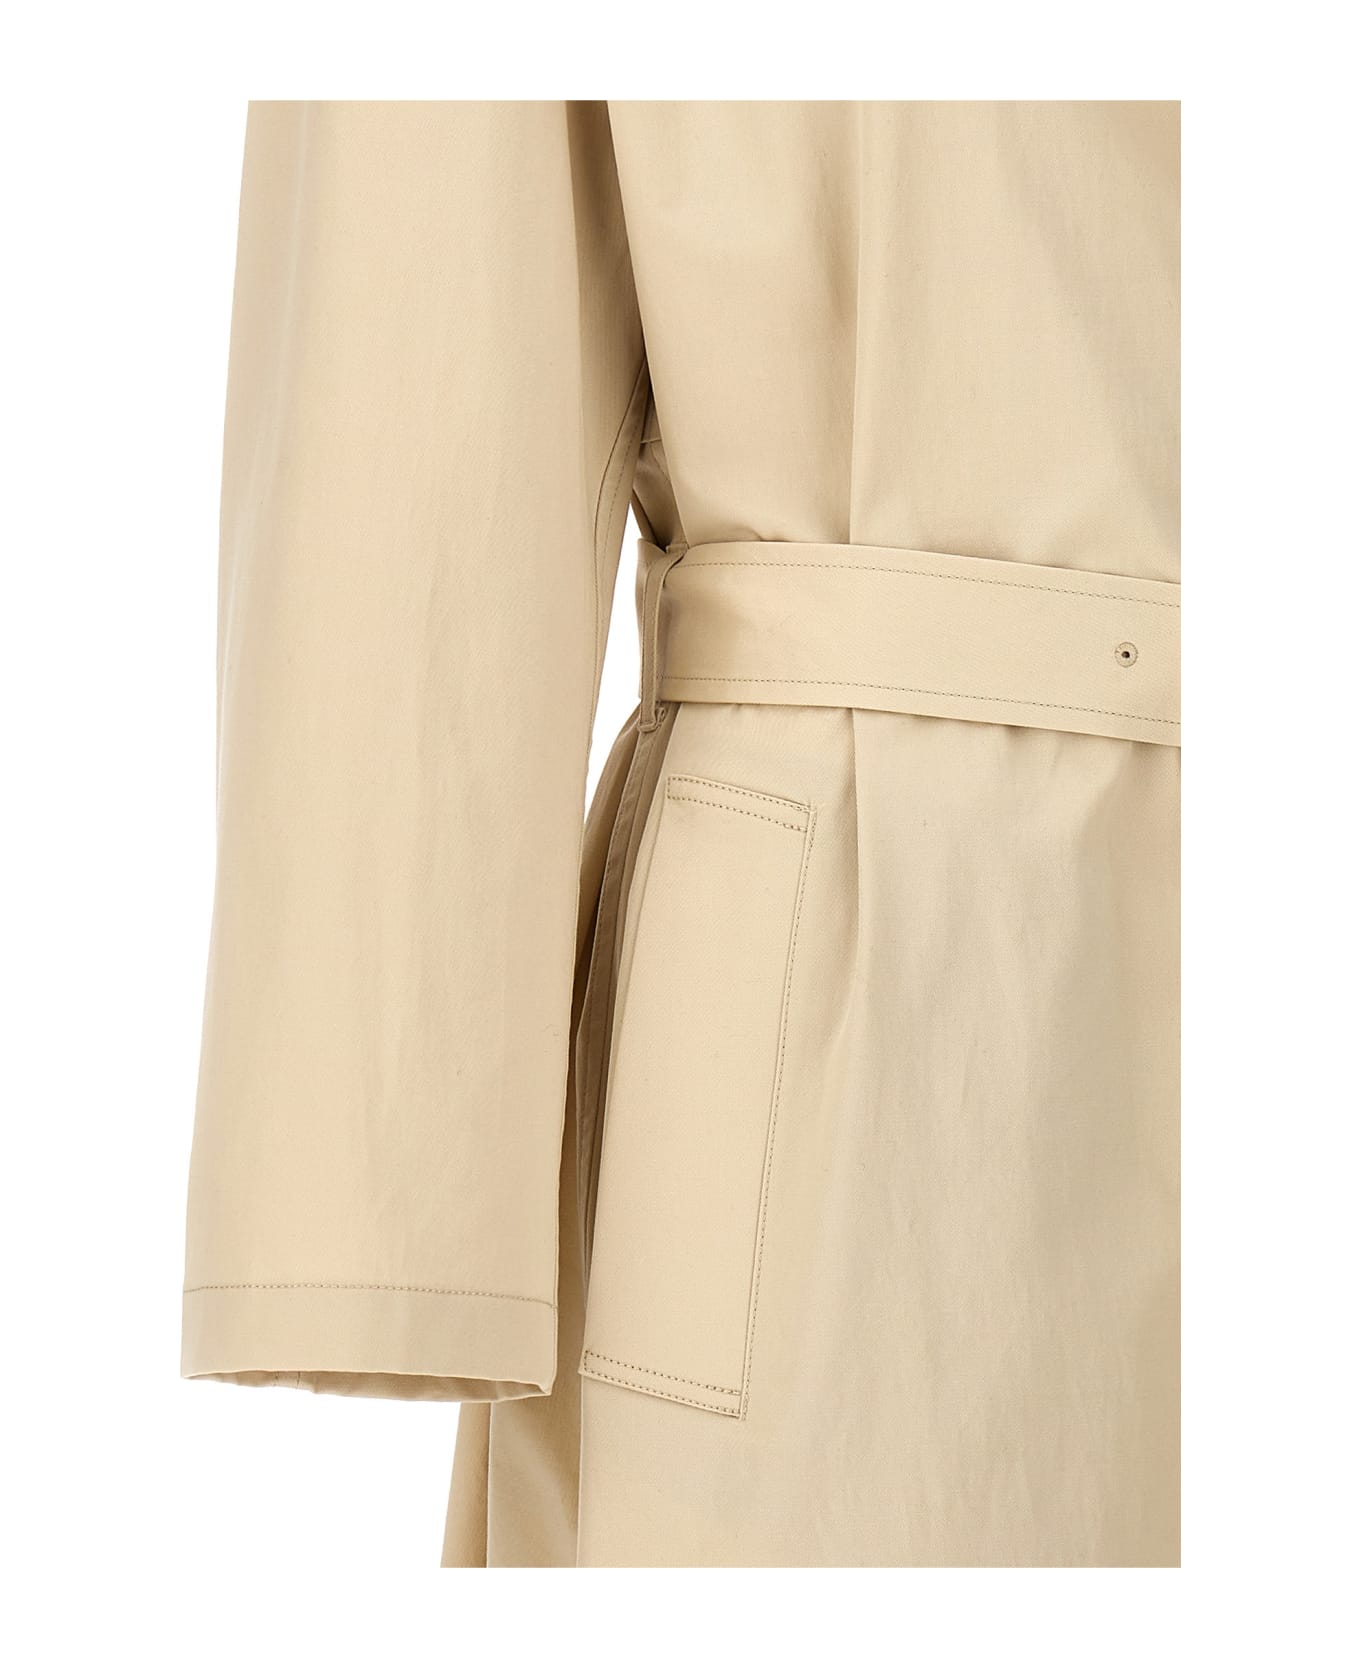 Theory Long Trench Coat - NEUTRALS